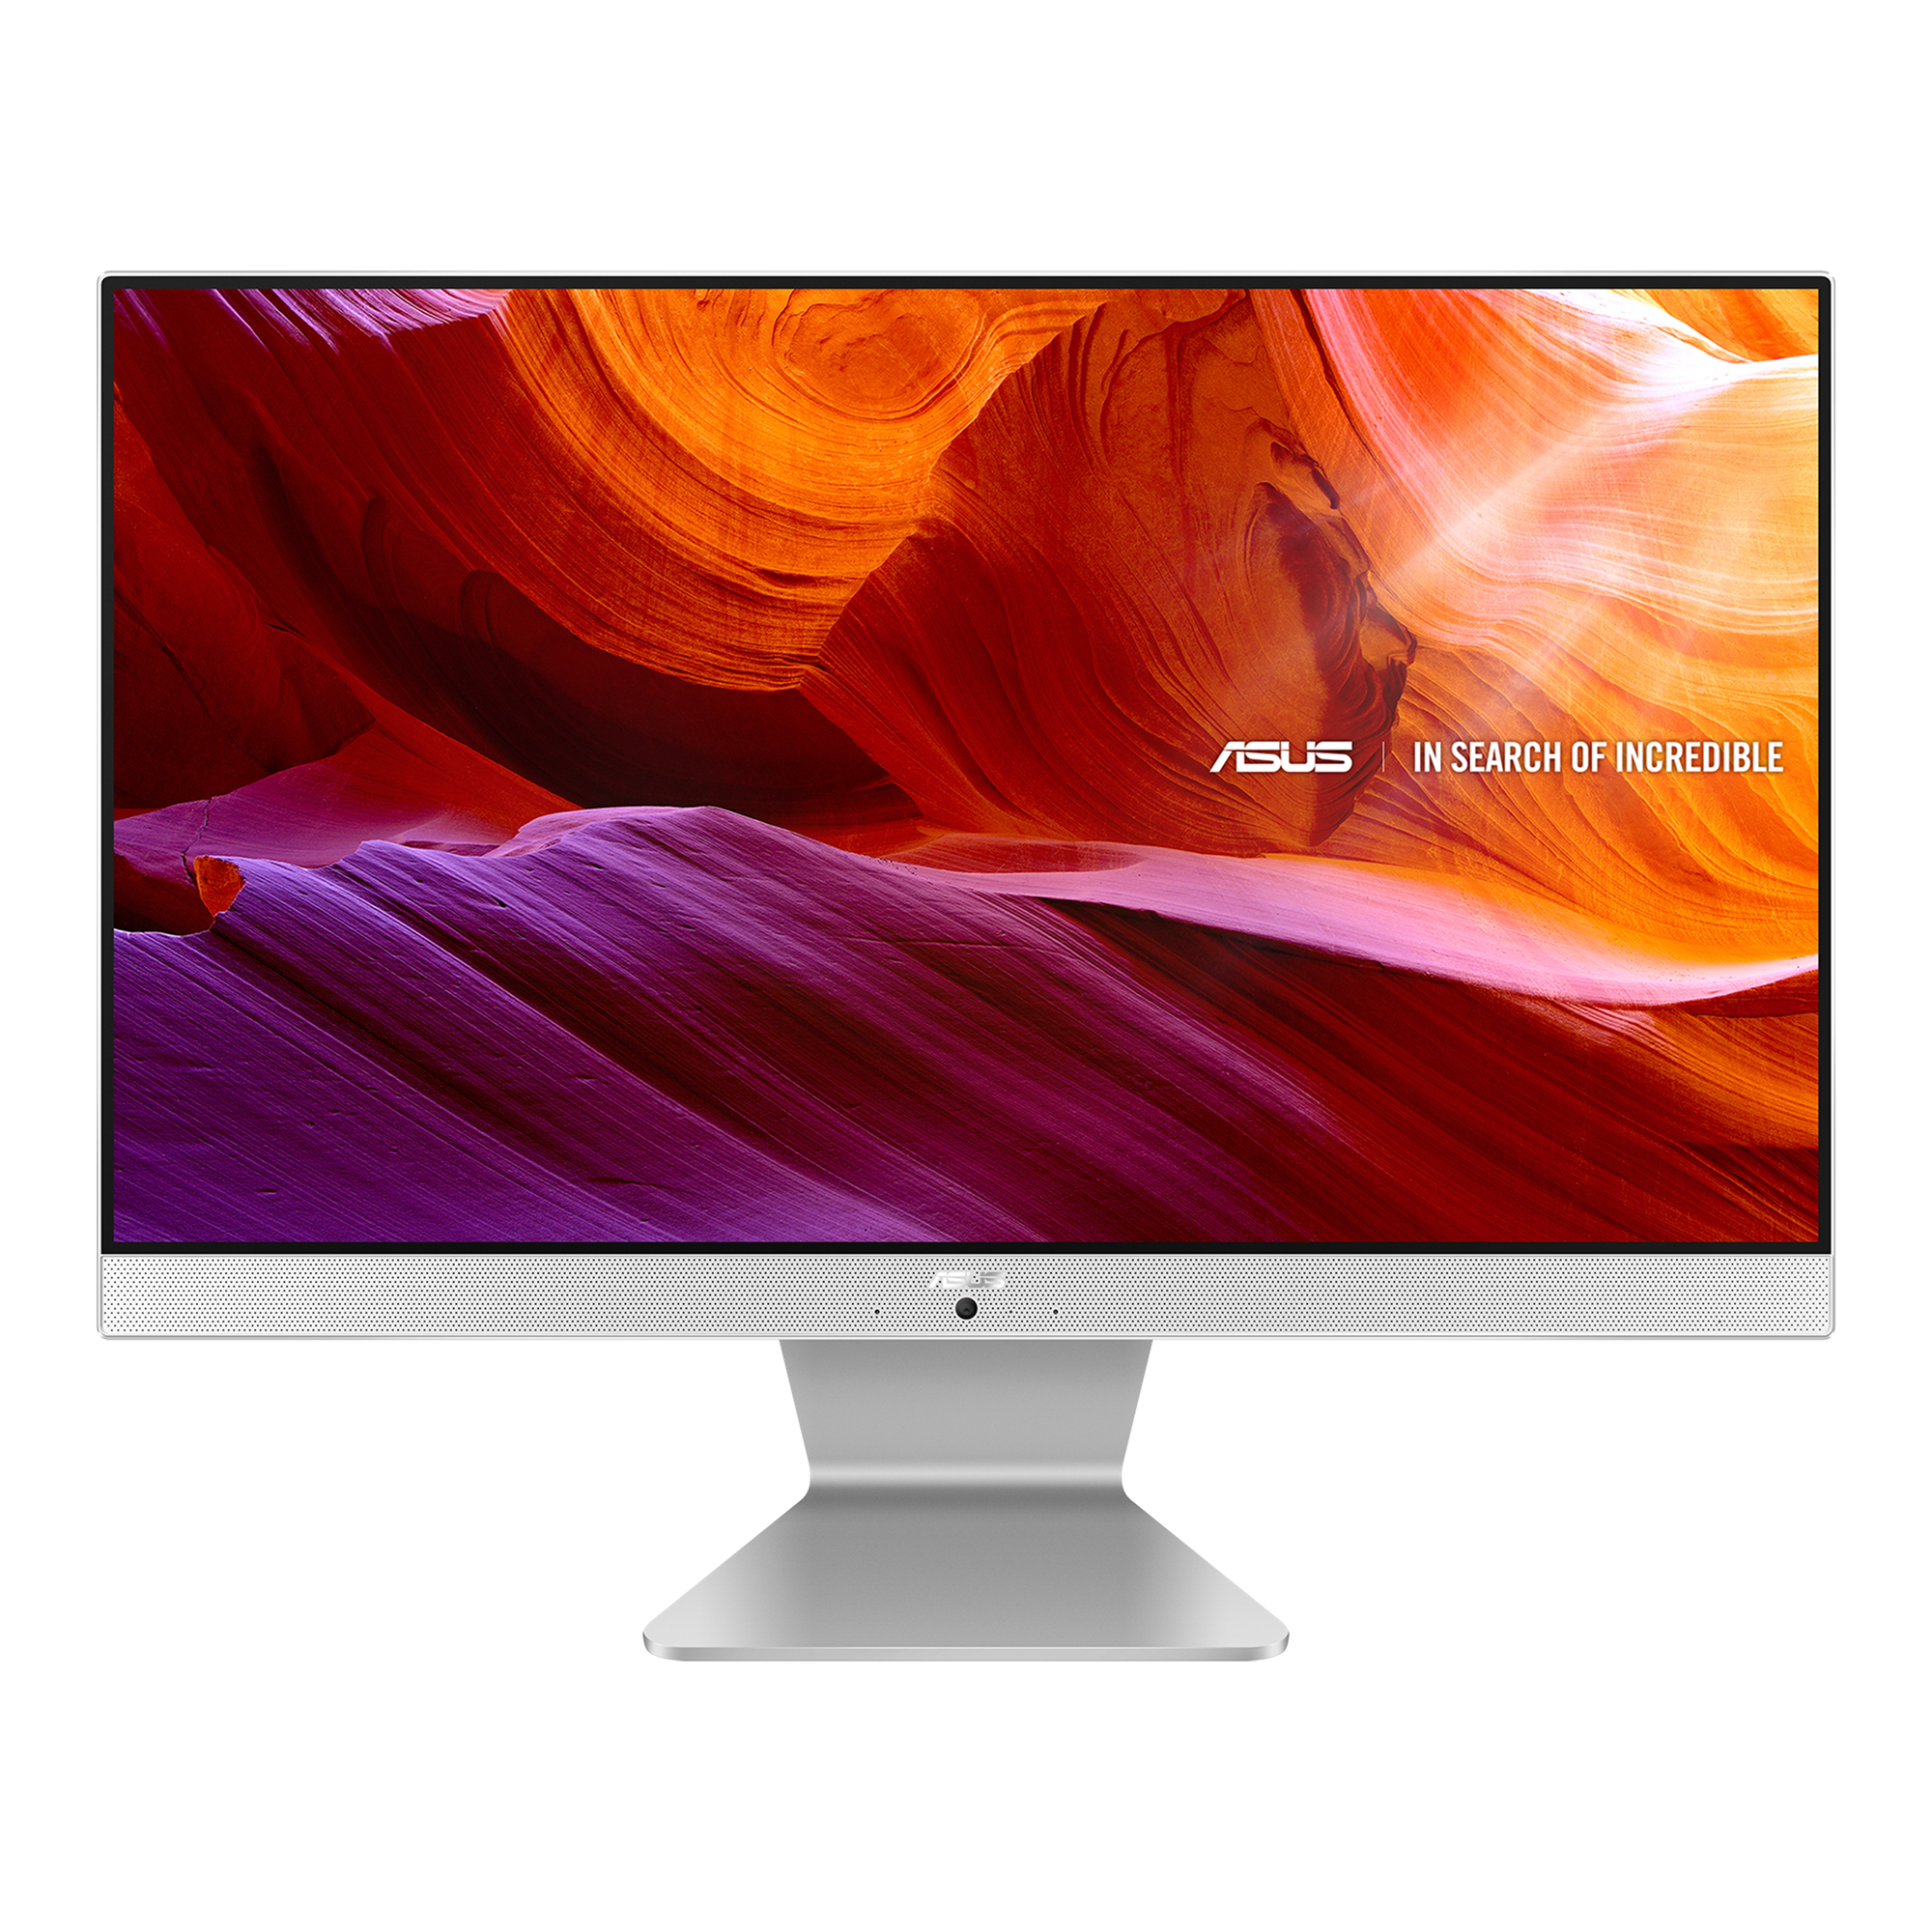 ASUS Vivo AIO V222 - Everyday Use All-in-One Computer | ASUS India